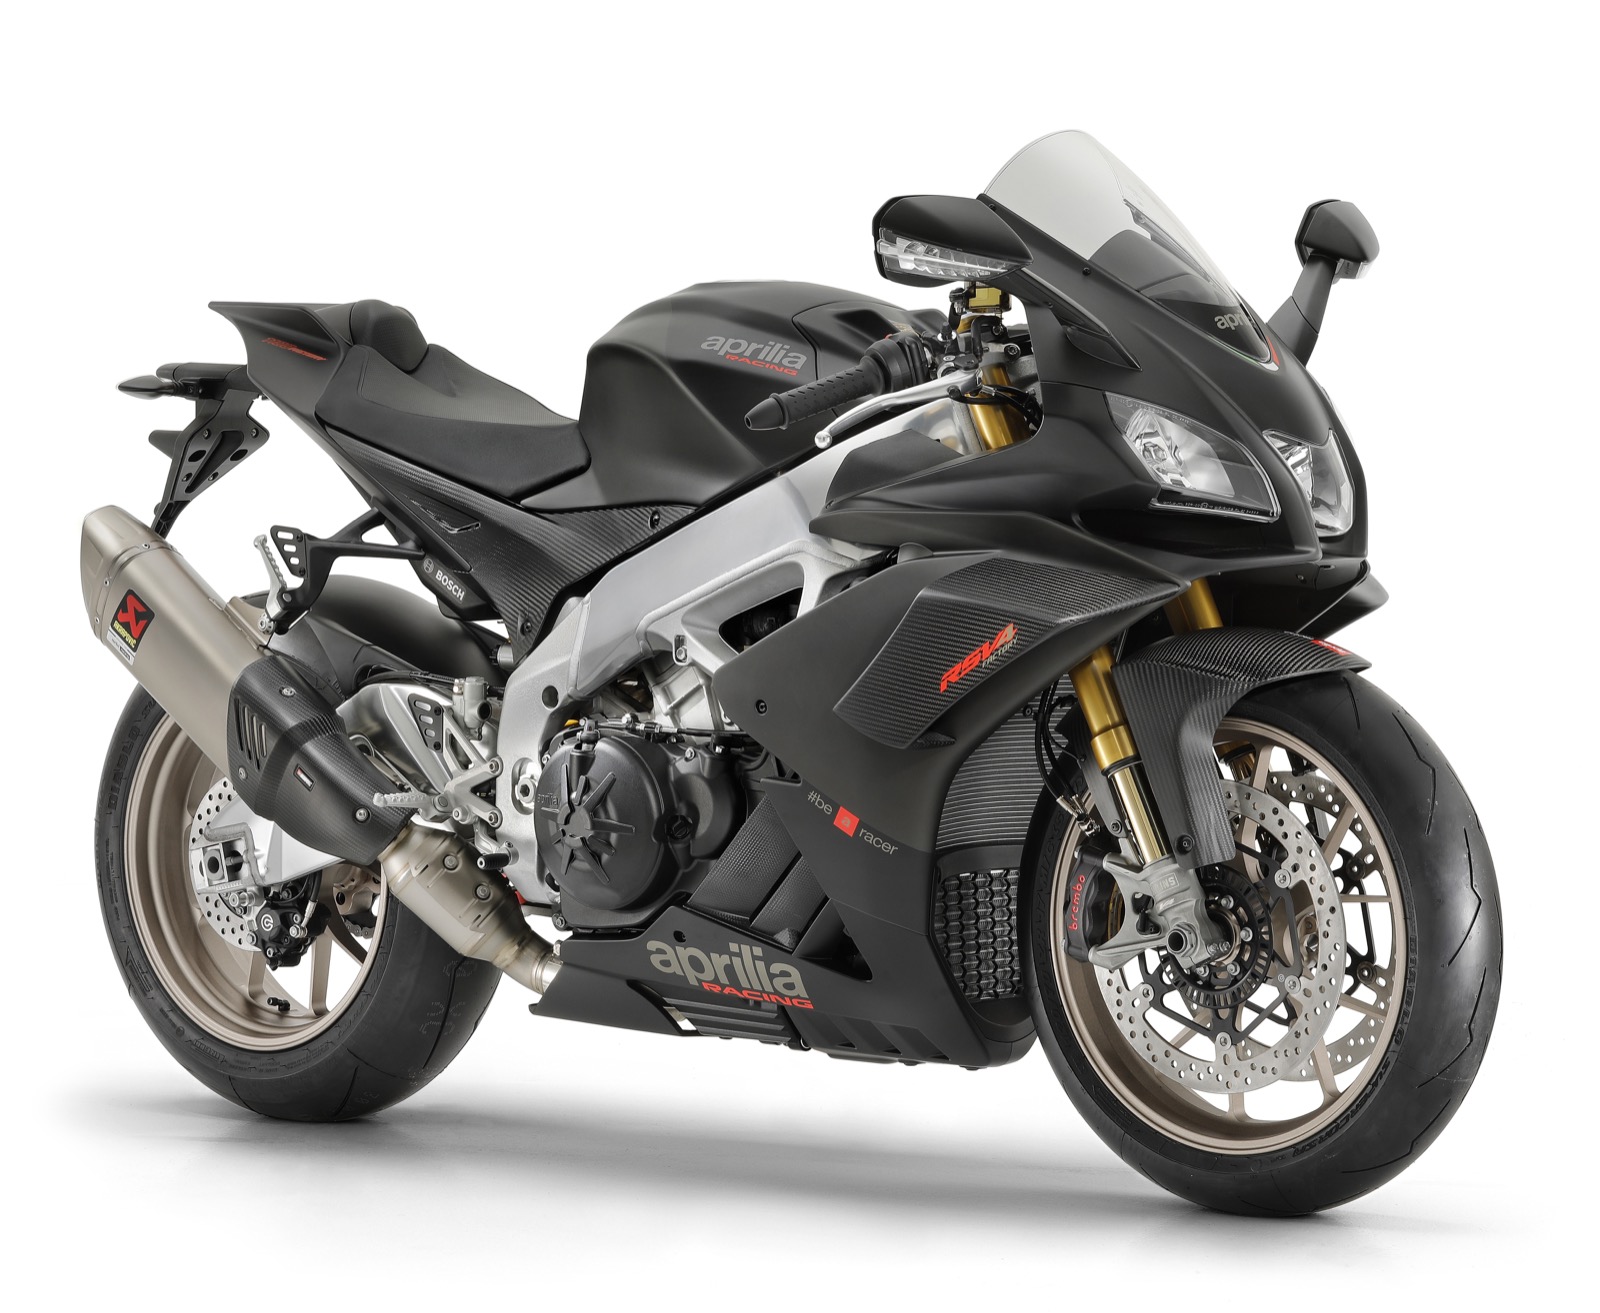 uddøde drag Juster Aprilia's New, Winglet-Equipped, 217-Horsepower RSV4 1100 Factory Is Most  Powerful, Lightest RSV4 Ever...And It's Street-Legal - Roadracing World  Magazine | Motorcycle Riding, Racing & Tech News